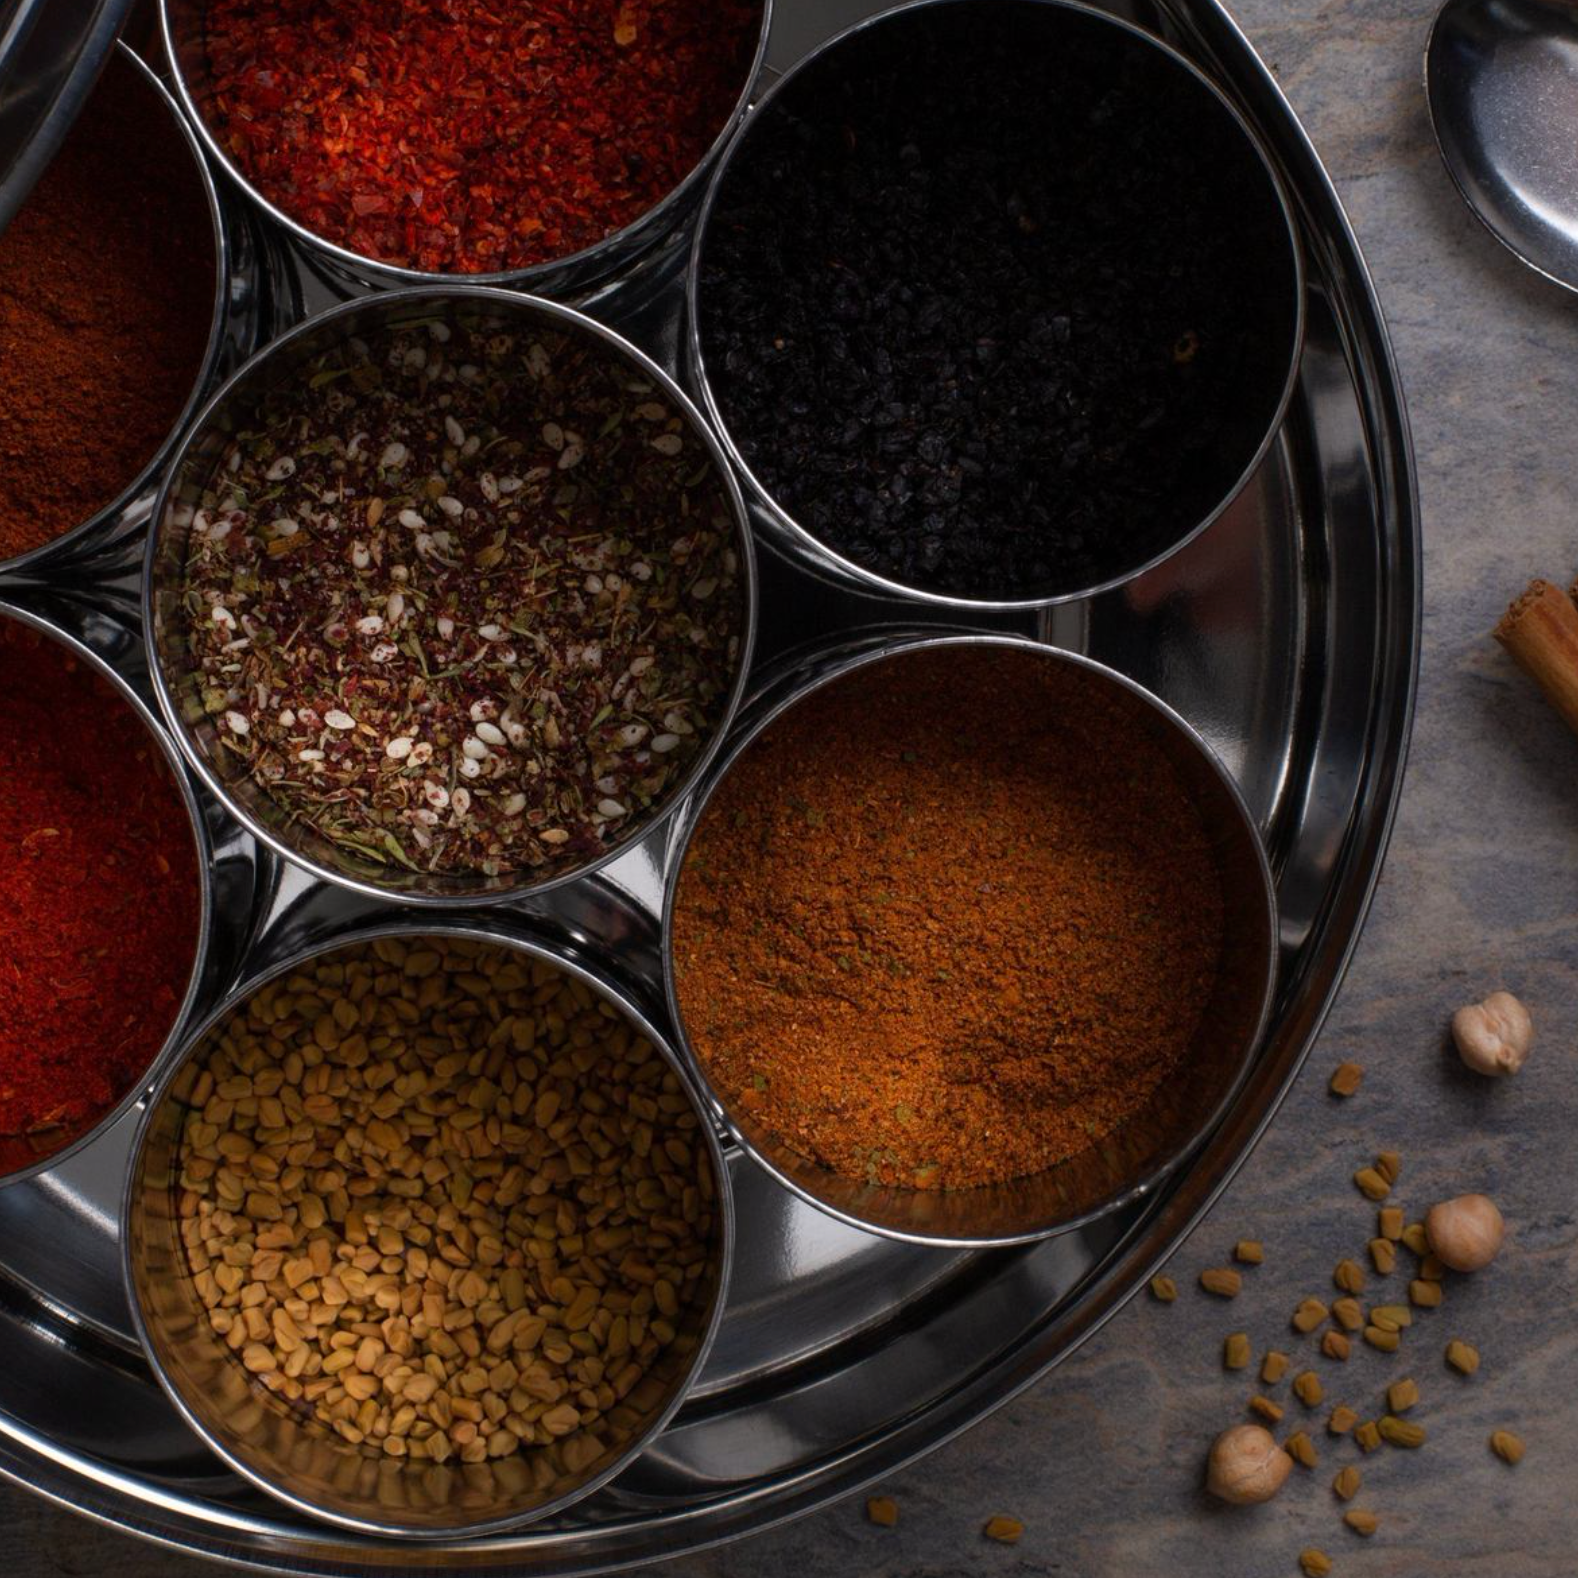 Middle Eastern &amp; African Spice Tin With 9 Spices